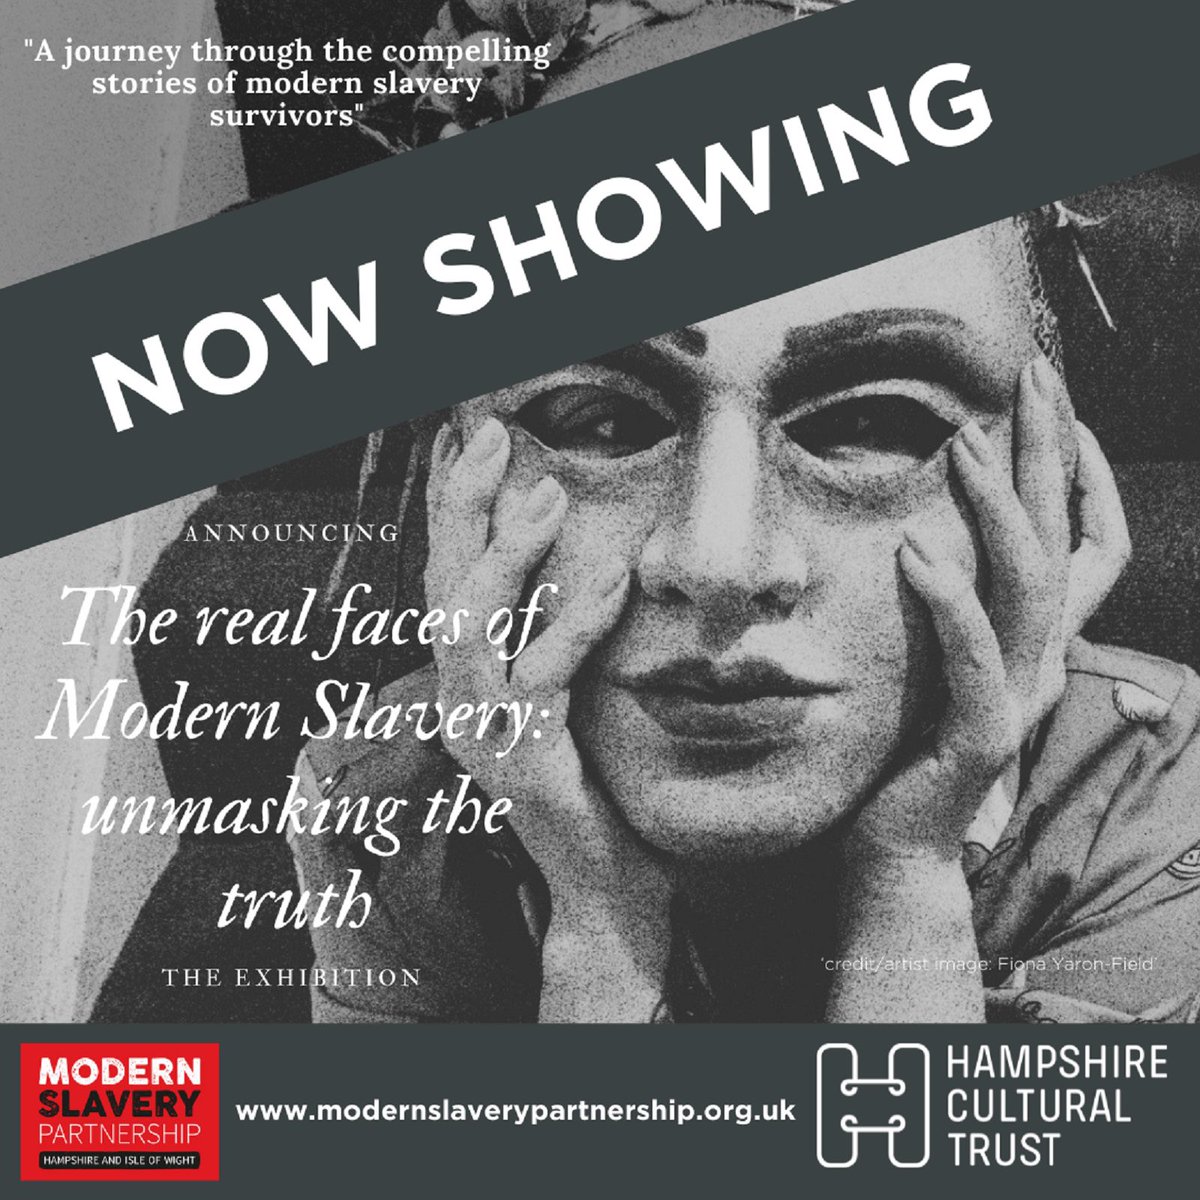 A journey through the compelling stories of modern slavery survivors. Visit the free exhibition, ‘The real faces of Modern Slavery: unmasking the truth’ until 30 Oct @AndoverMuseum @HantsCulture #modernslavery Please note some exhibition content may not be suitable for children